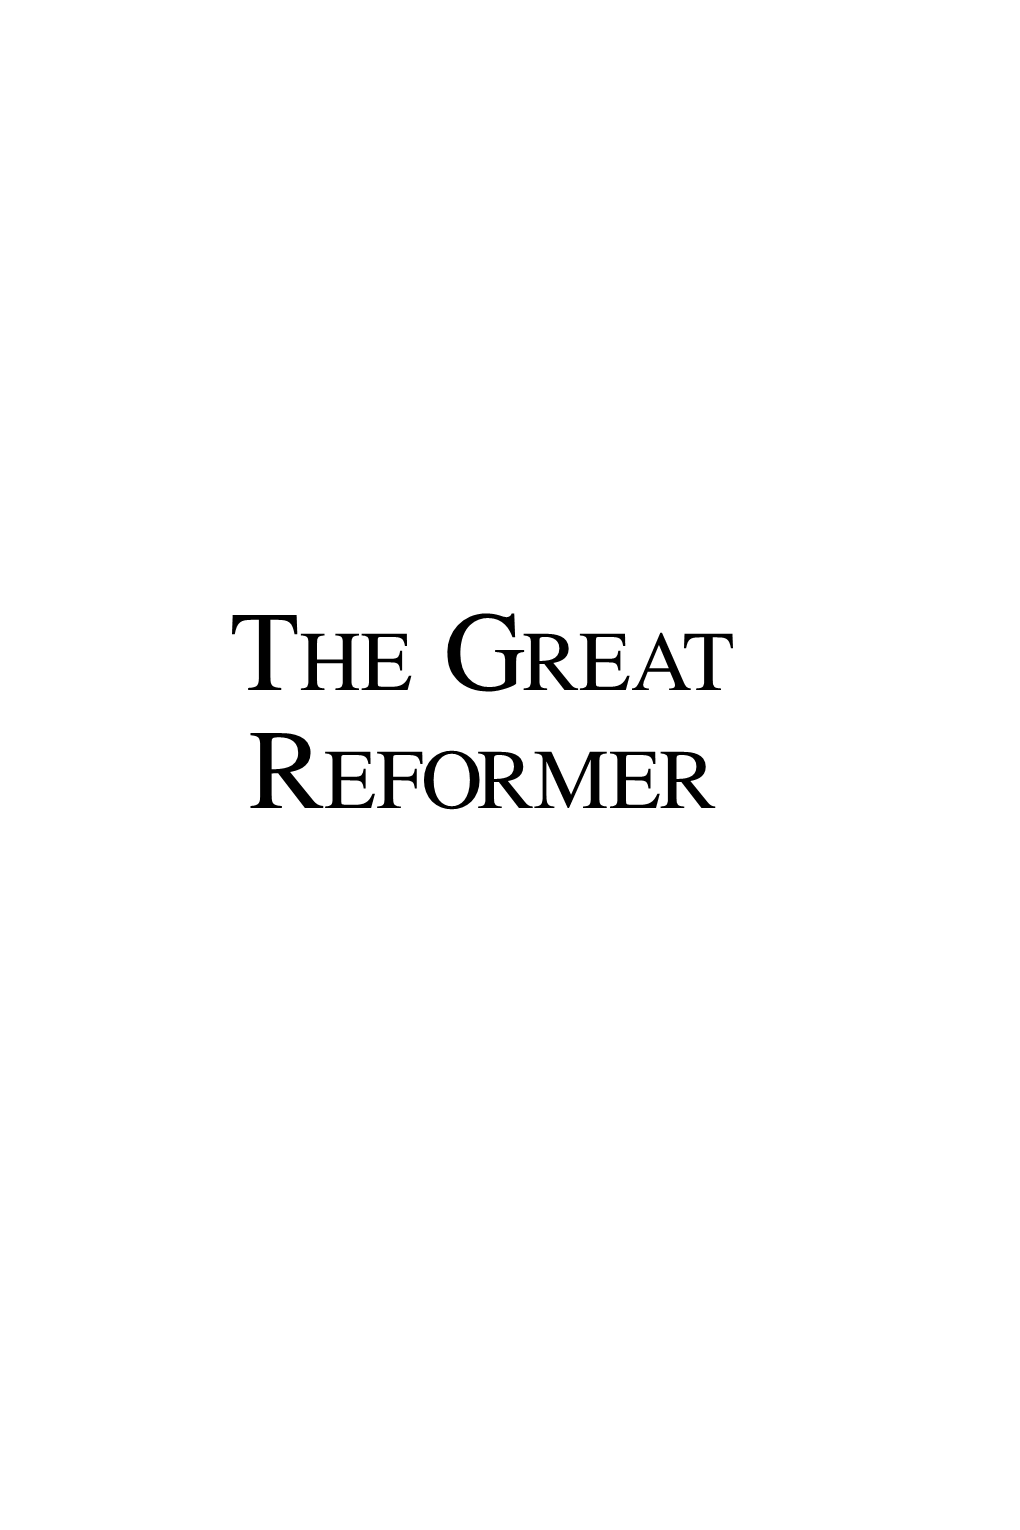 The Great Reformer